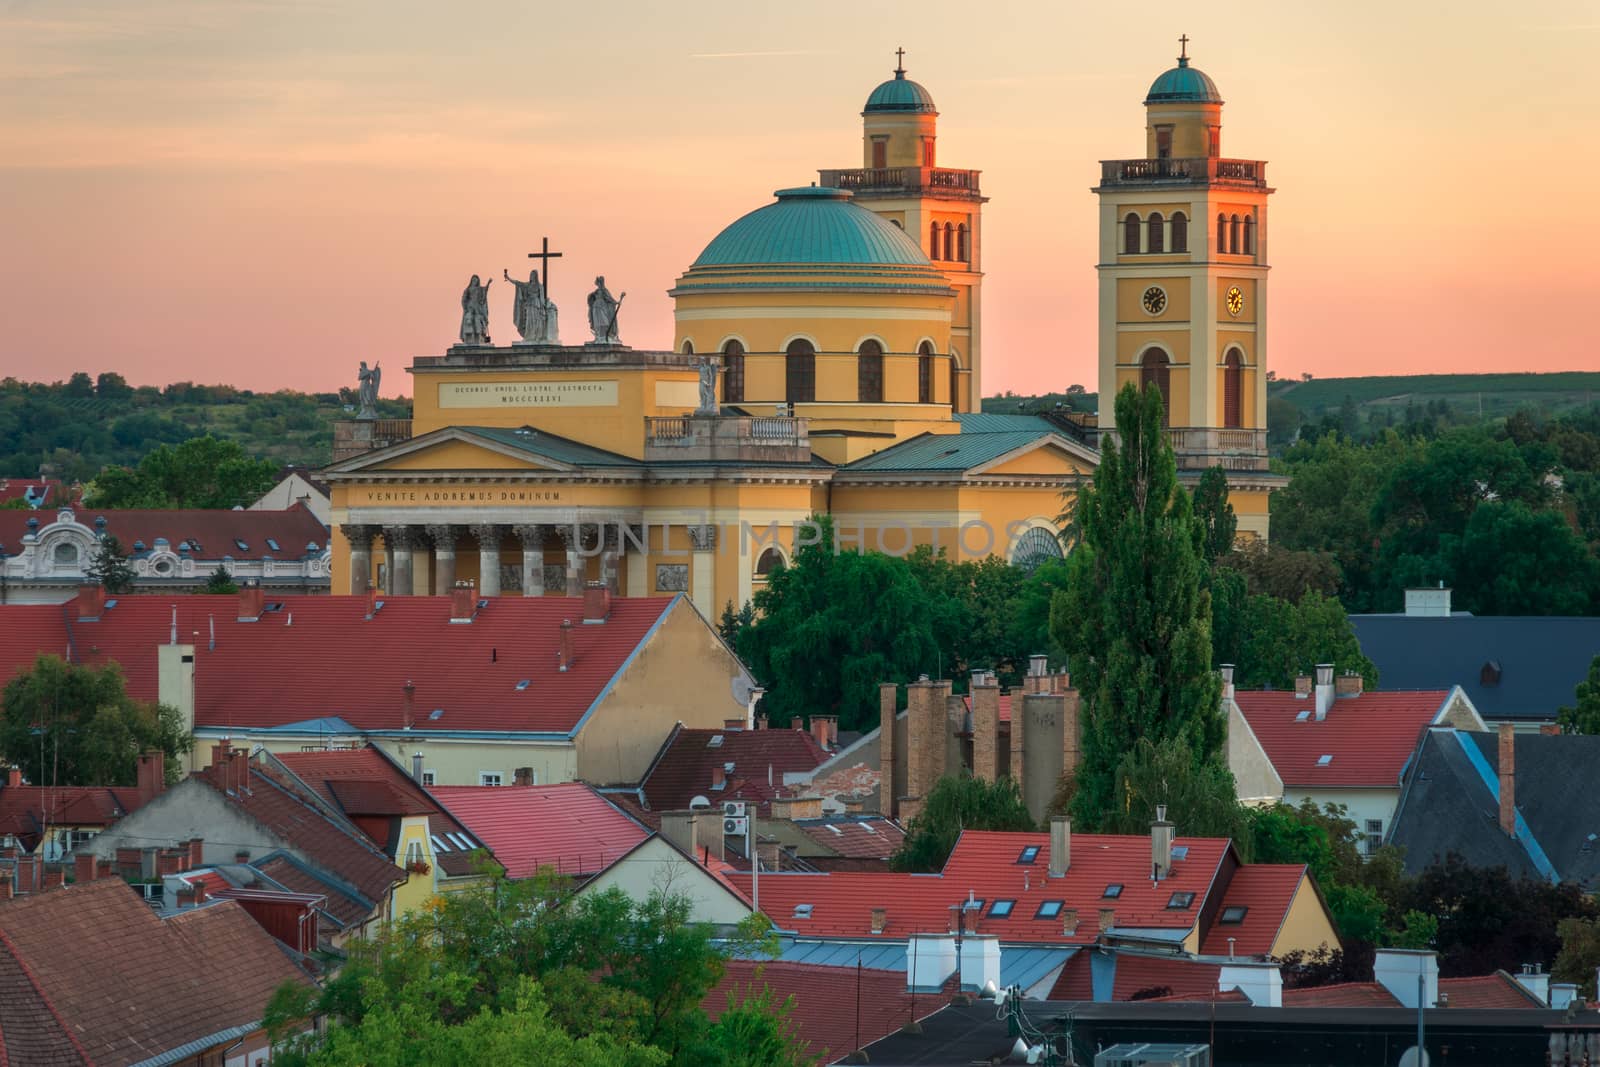 Eger Hungary, one of the largest cities in Hungary. It's famous for producing wine.